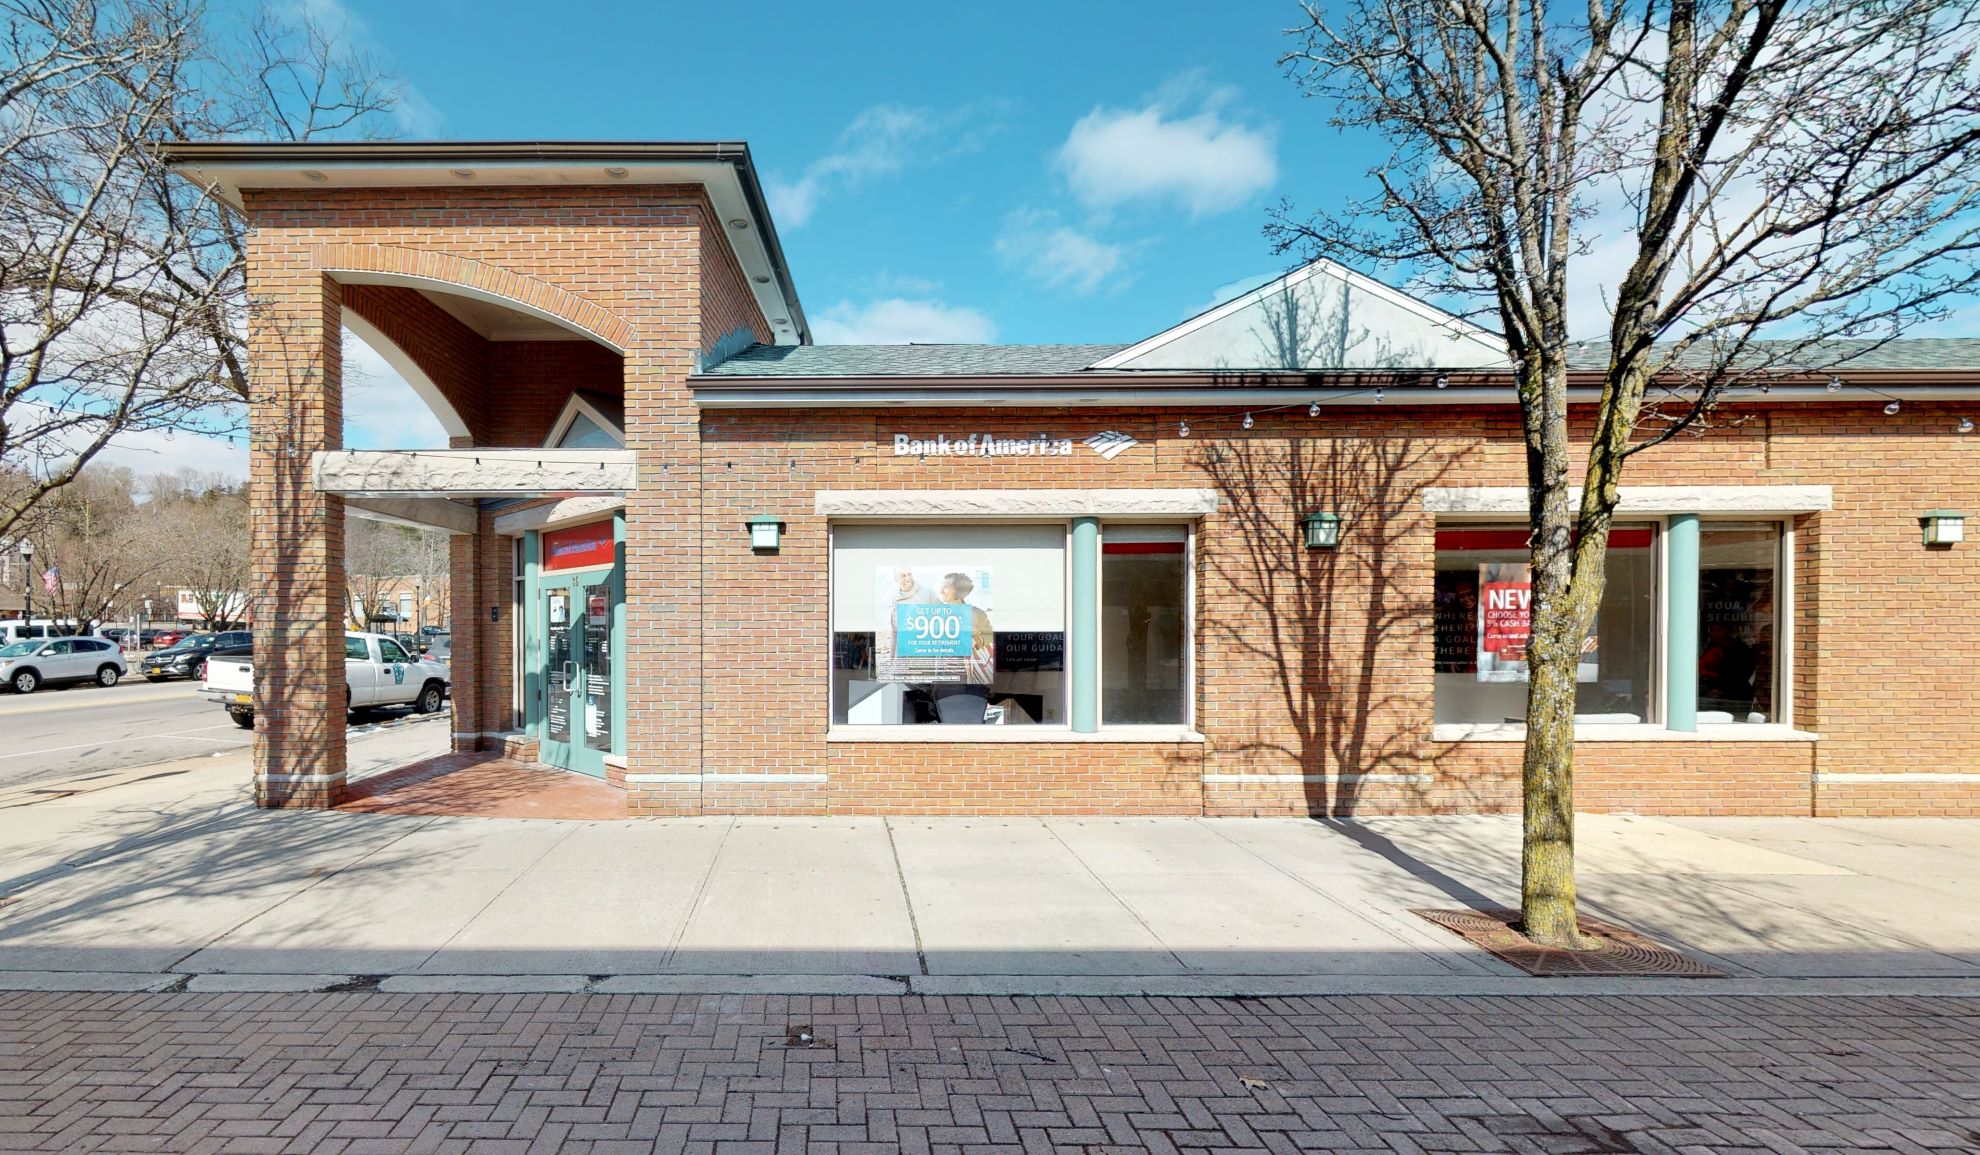 Bank of America financial center with walk-up ATM | 35 S Moger Ave, Mount Kisco, NY 10549